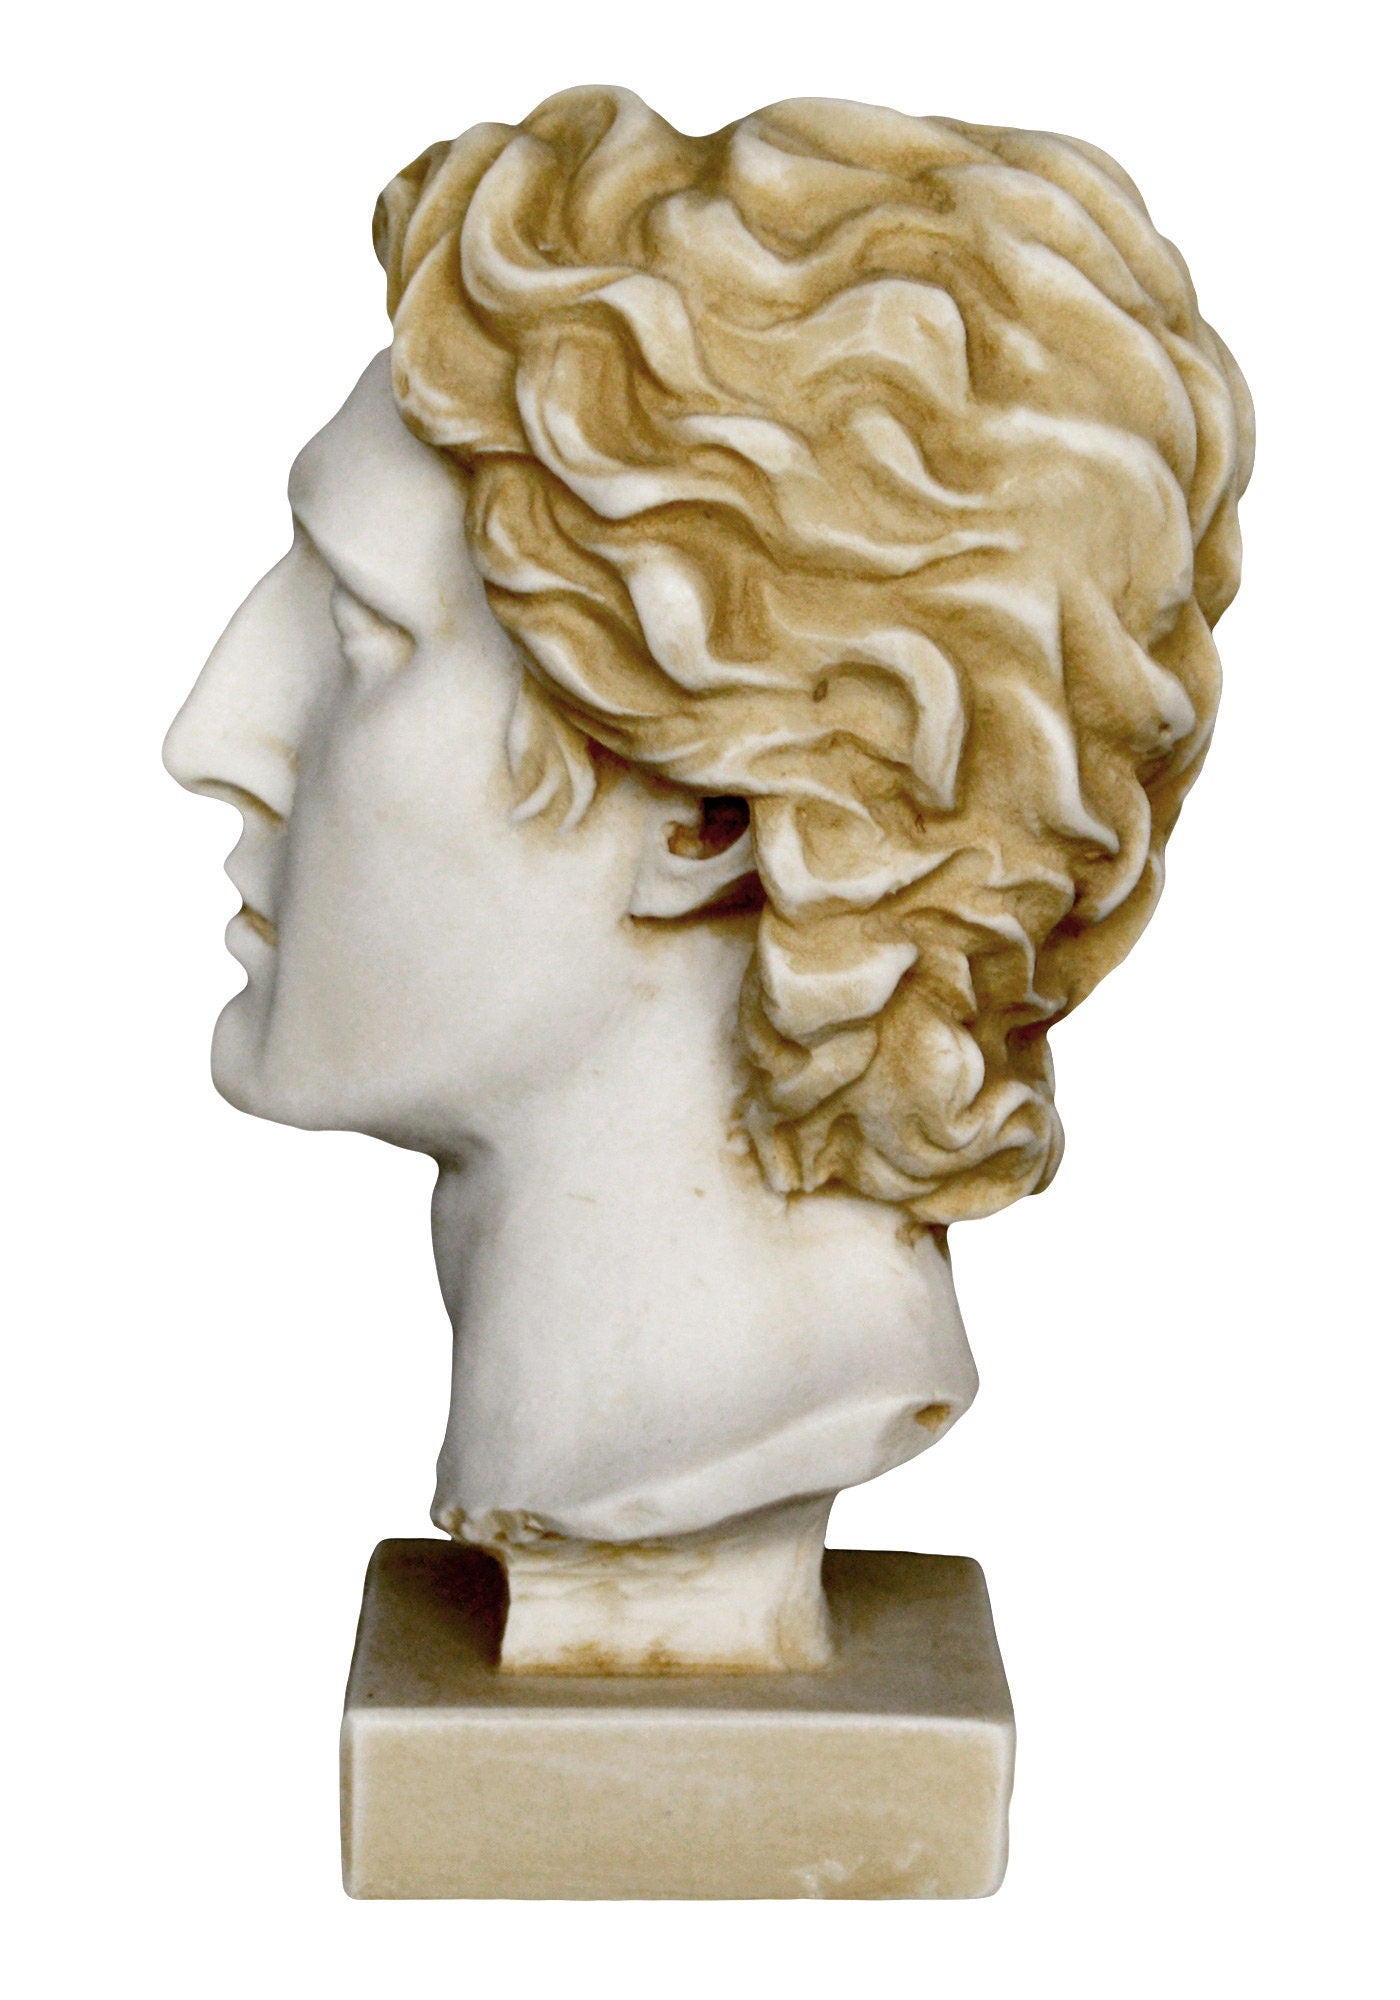 Alexander the Great Bust - King of Macedonia - 356–323 BC - Son of Philip - Visionary Leader - Aged Alabaster Sculpture